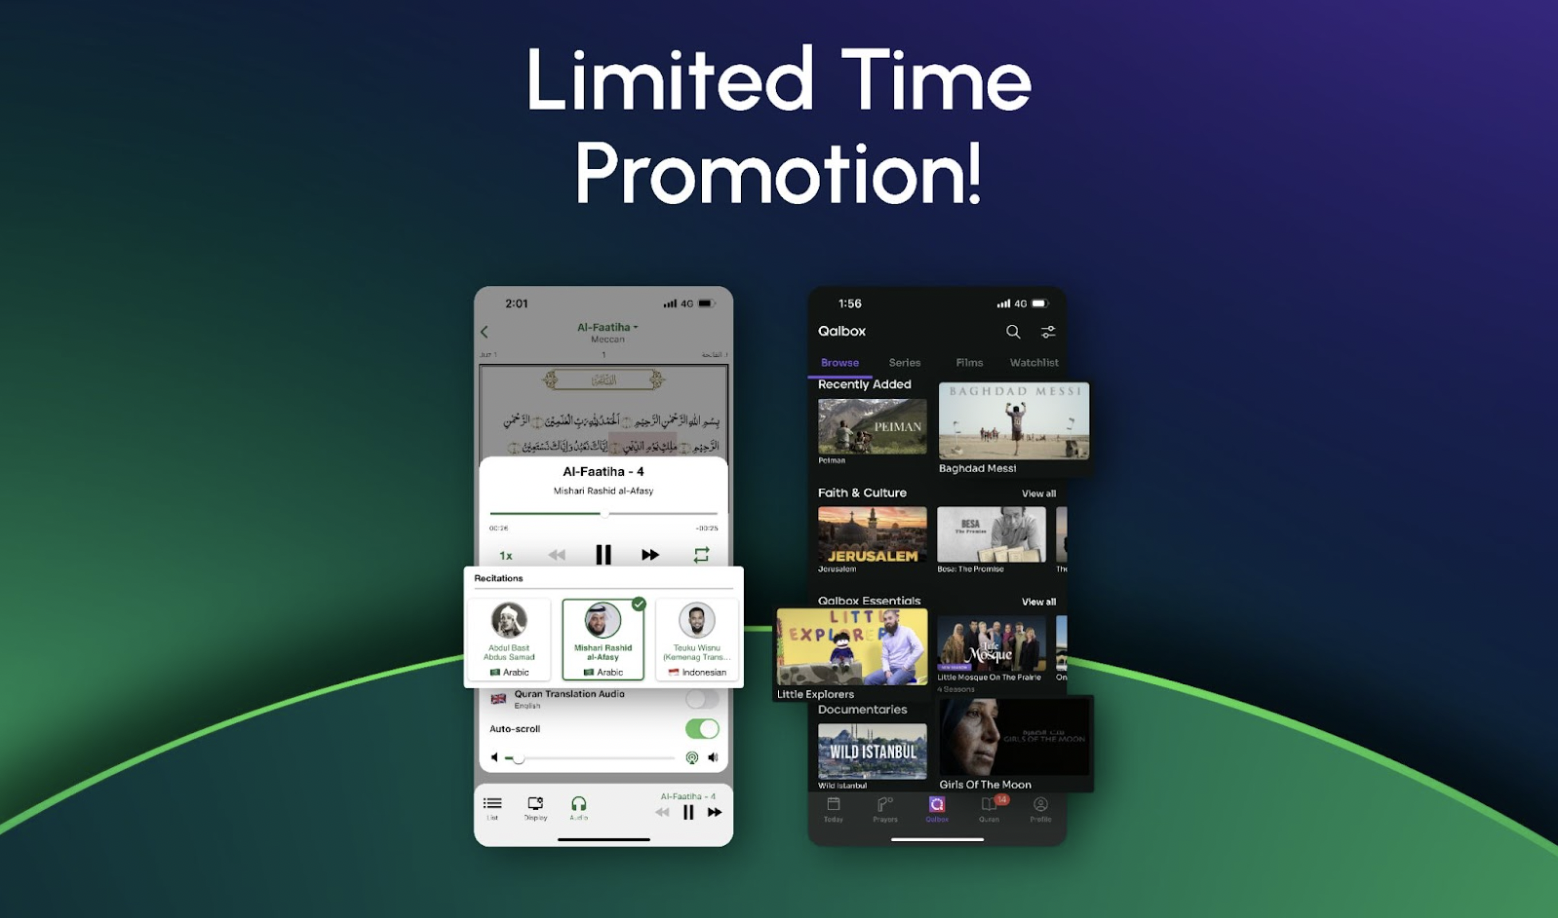 Limited Time Promotion for the Muslim Pro App